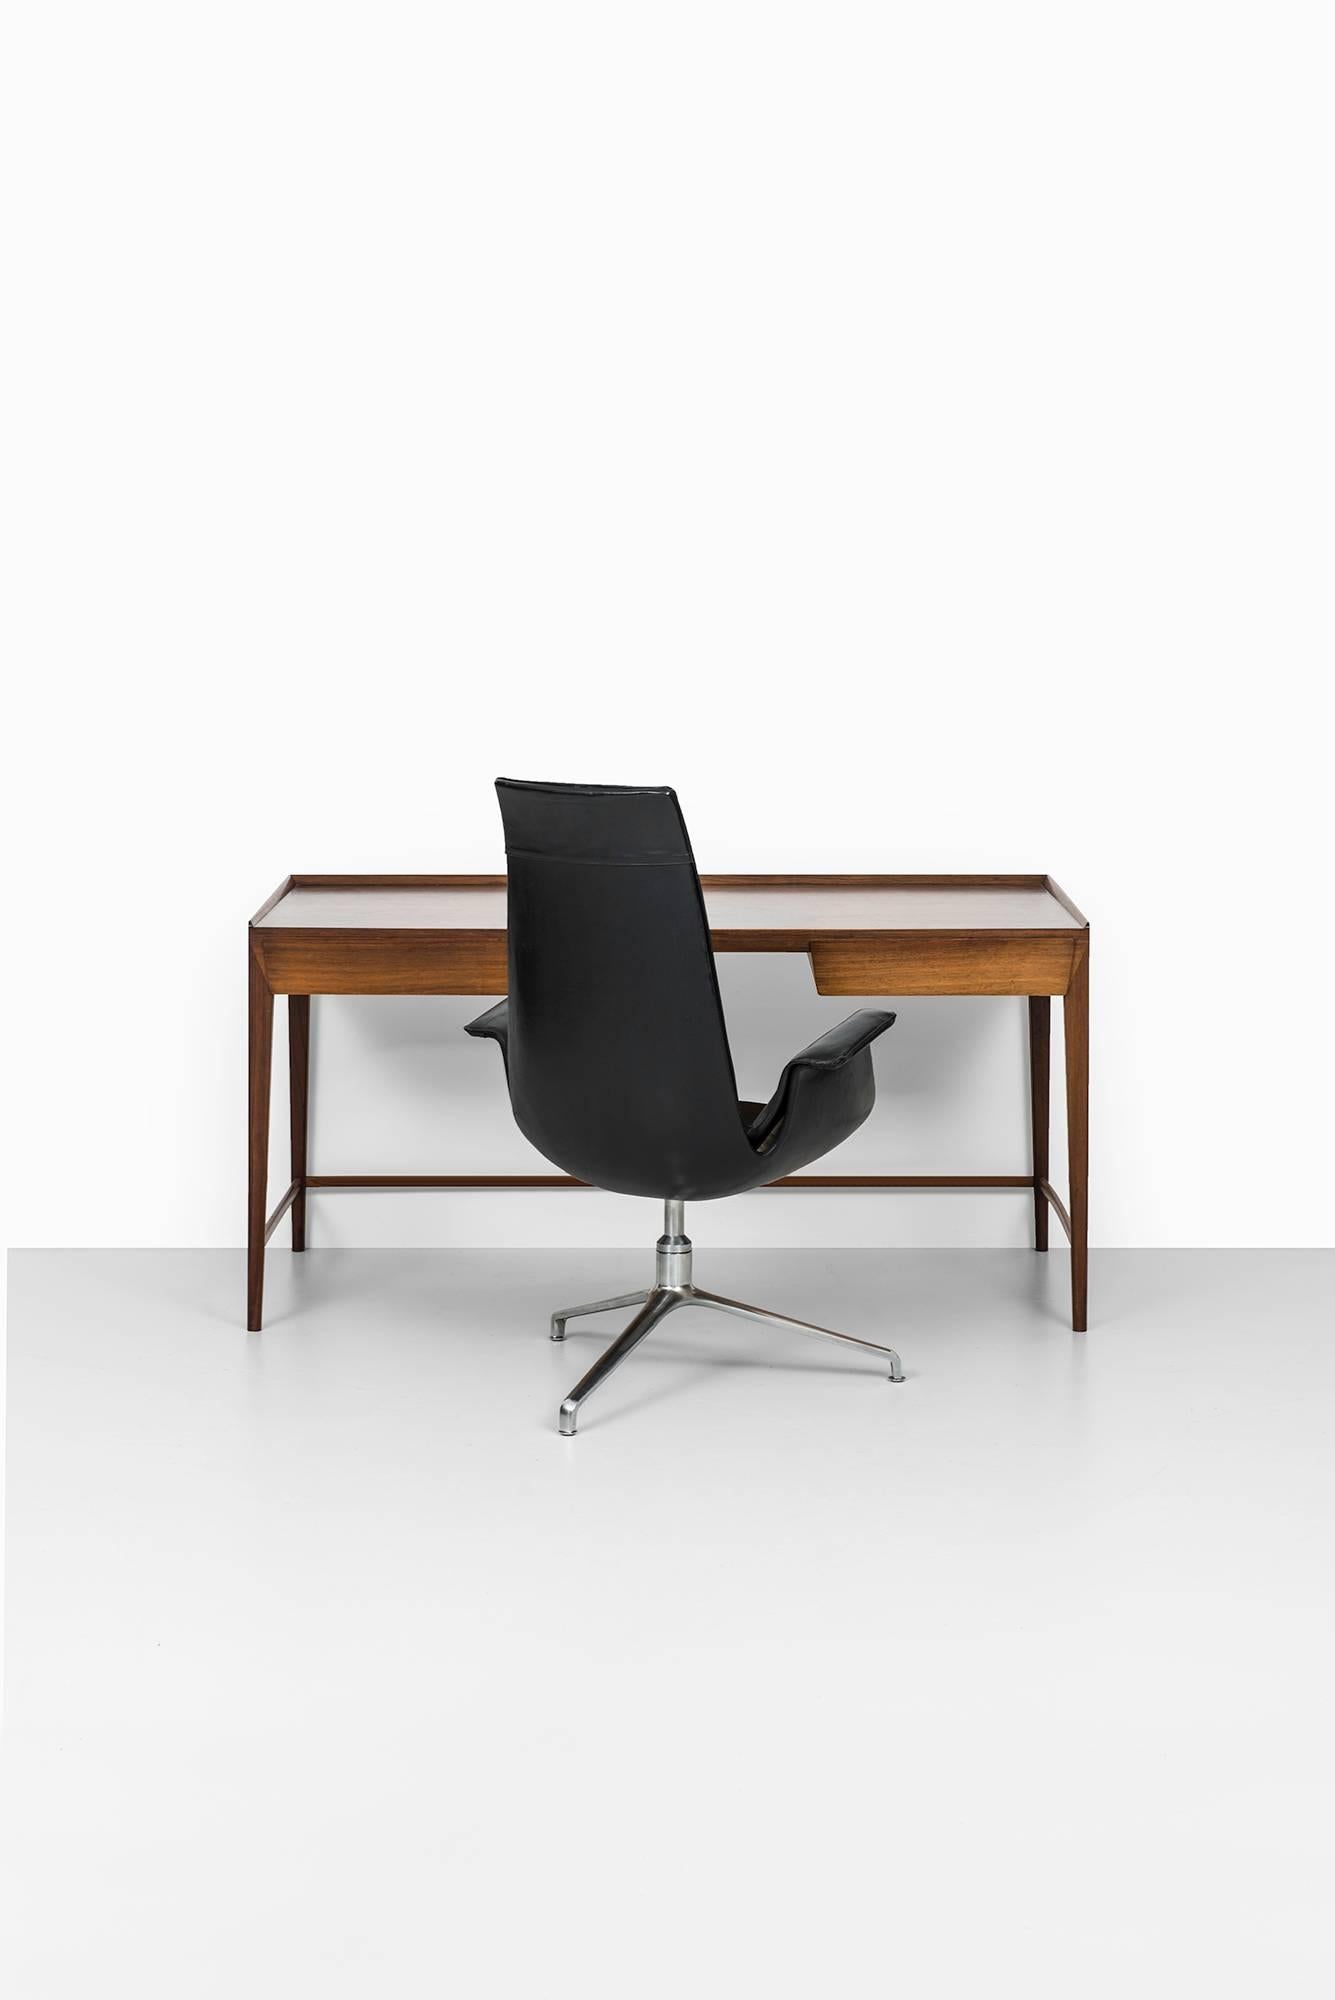 Frode Holm desk in rosewood by Illums Bolighus in Denmark 2